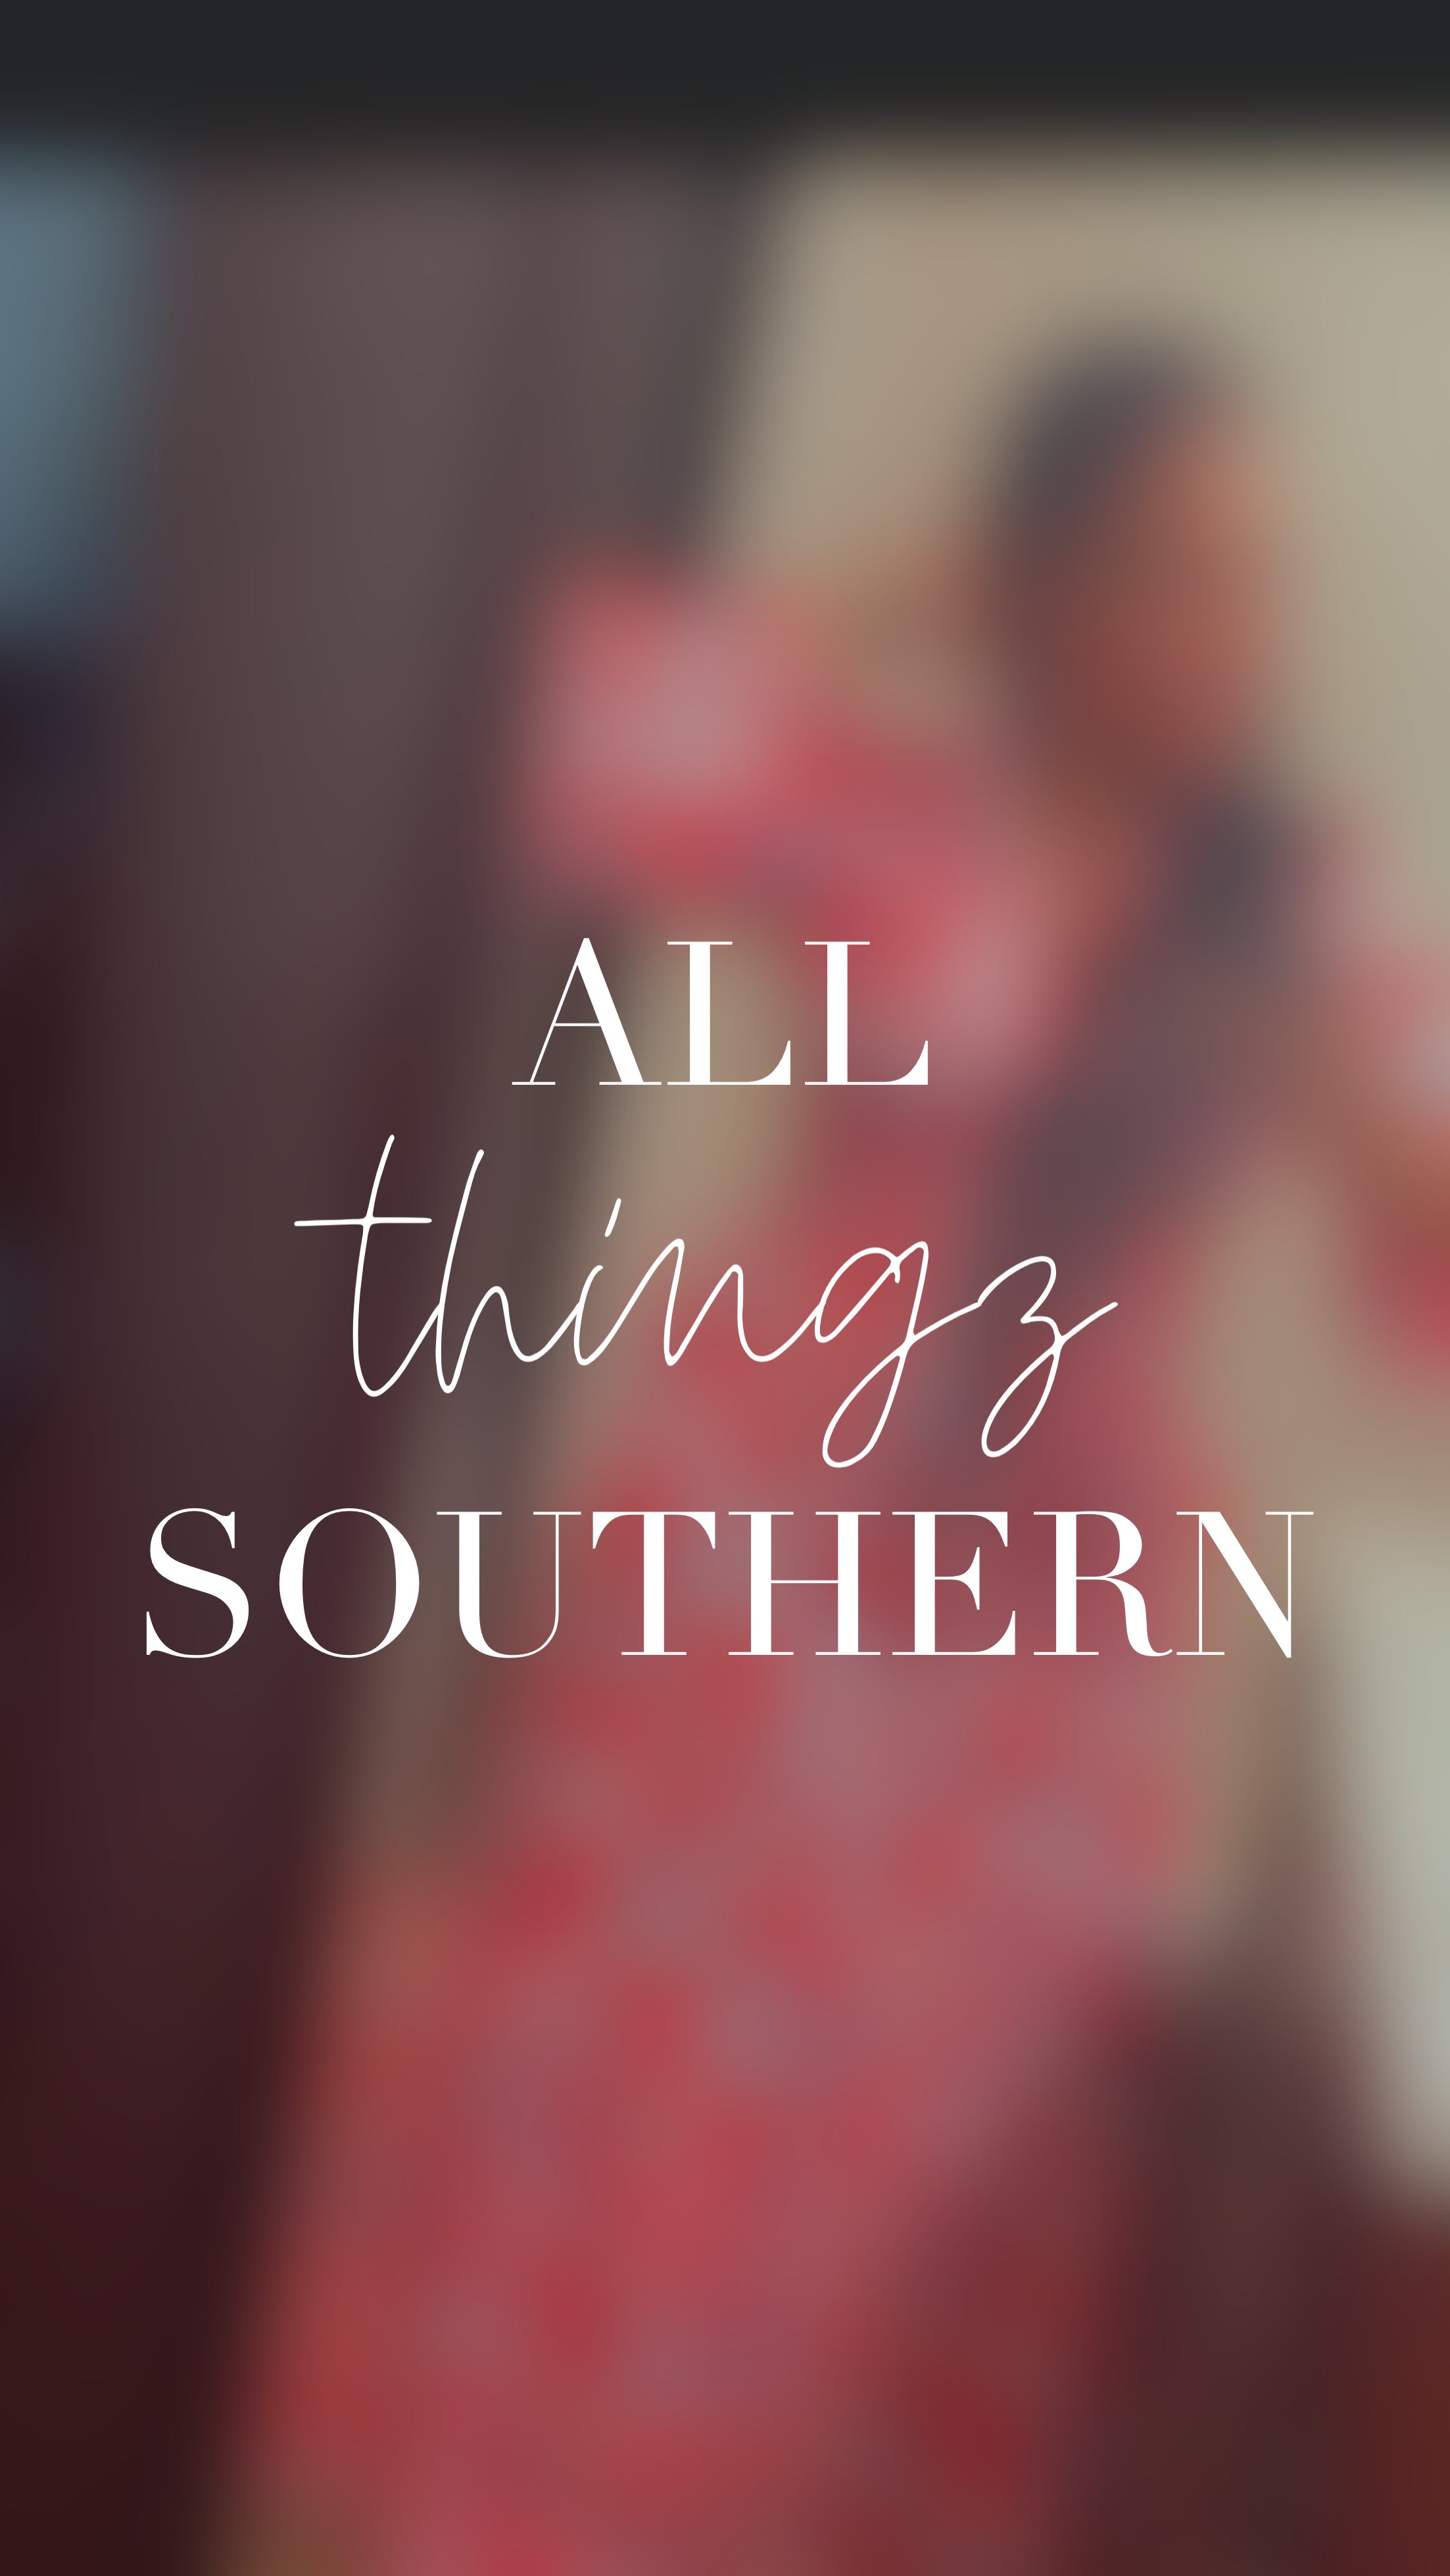 All Thingz Southern